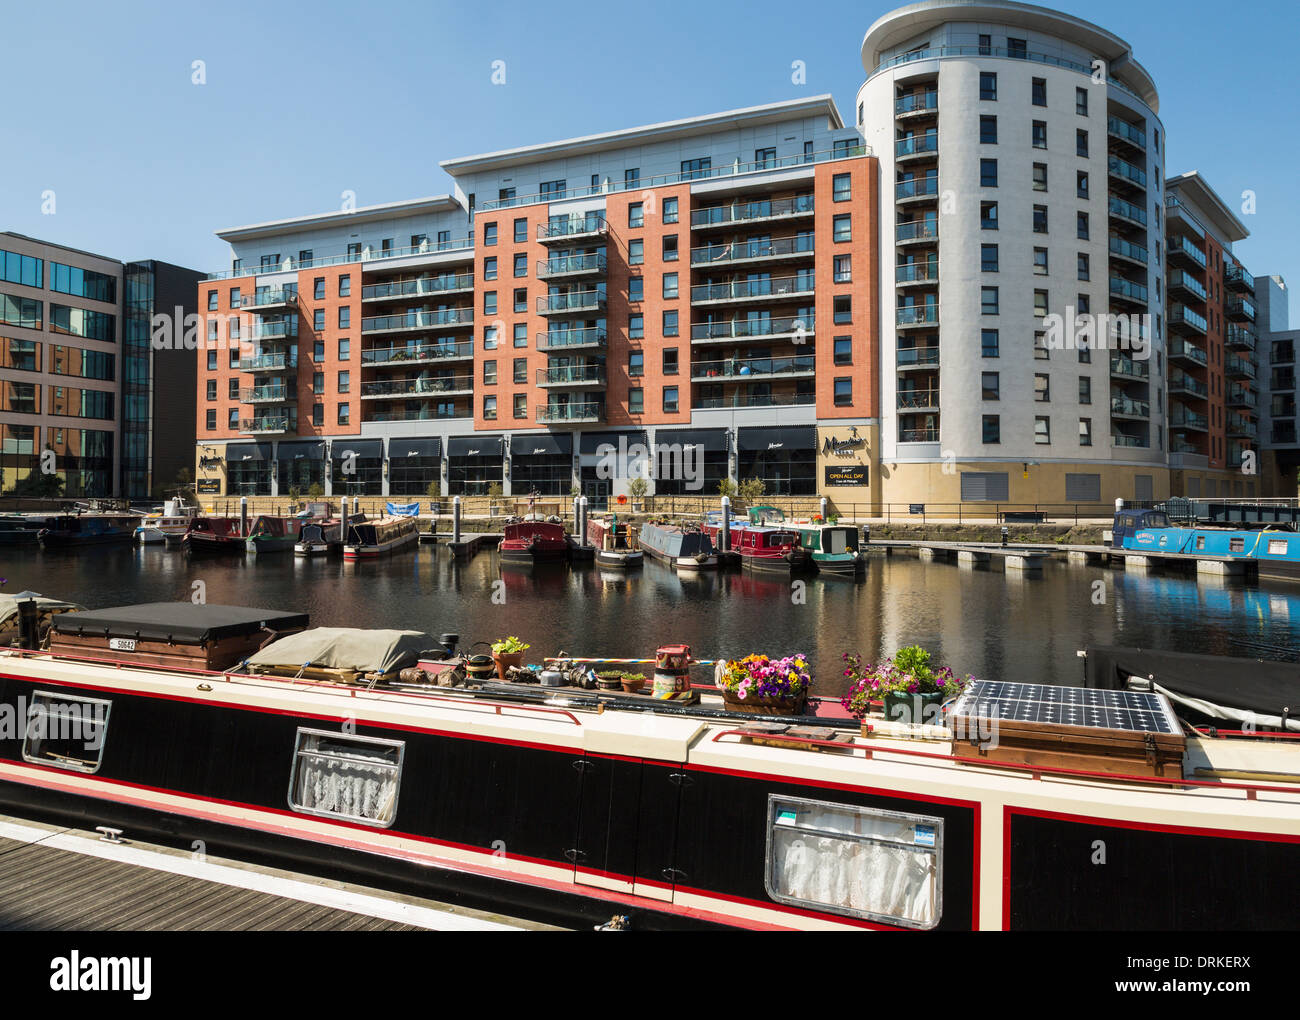 Boats and apartment buildings at Clarence Dock, Leeds, England Stock Photo